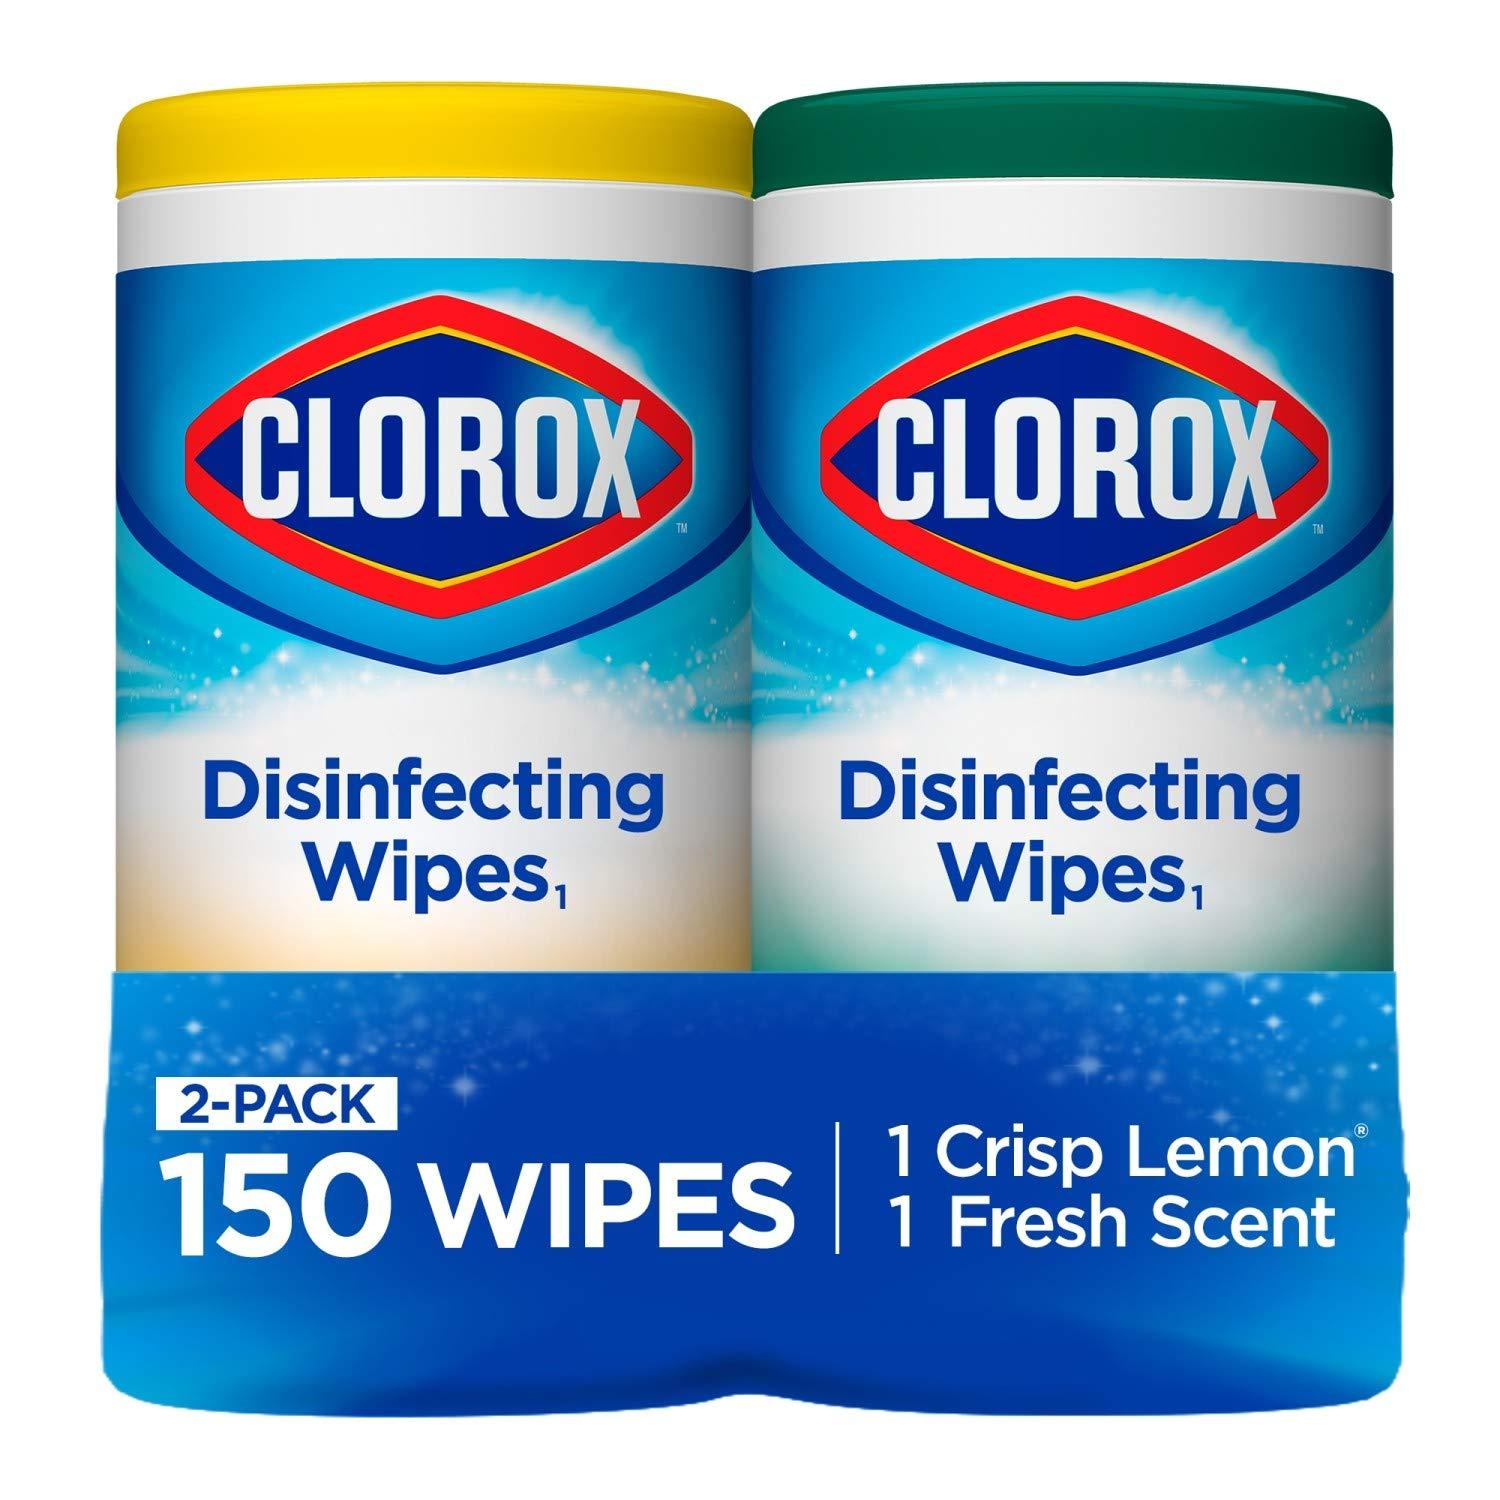 Clorox Disinfecting Wipes Value Pack, 75 Count Each, Pack of 2 (Package May Vary)